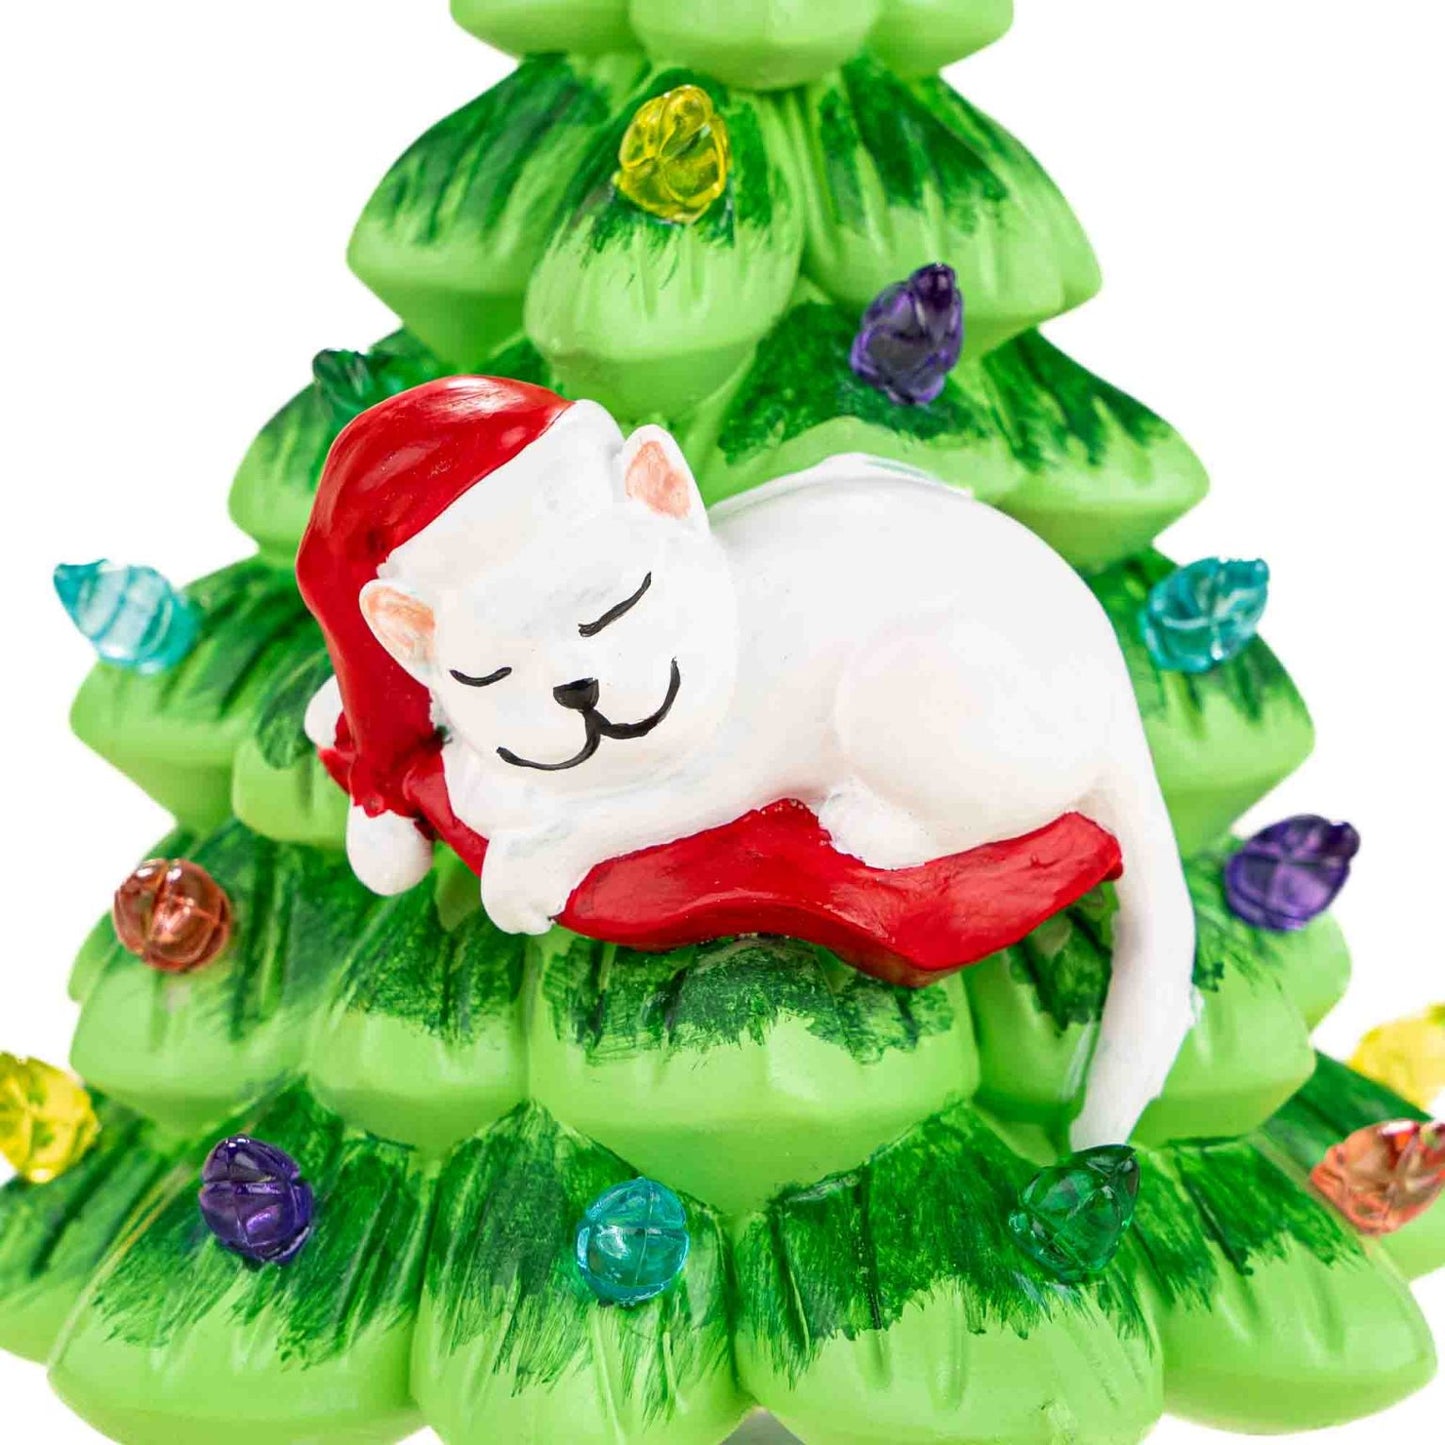 iHeartCats Exclusive - Sleeping Cat Christmas Tree Night Light, Large  6",  Nostalgic, Hand Crafted Resin Christmas Tree, Holiday Home Decor for Bathroom, Kitchen, Family Room